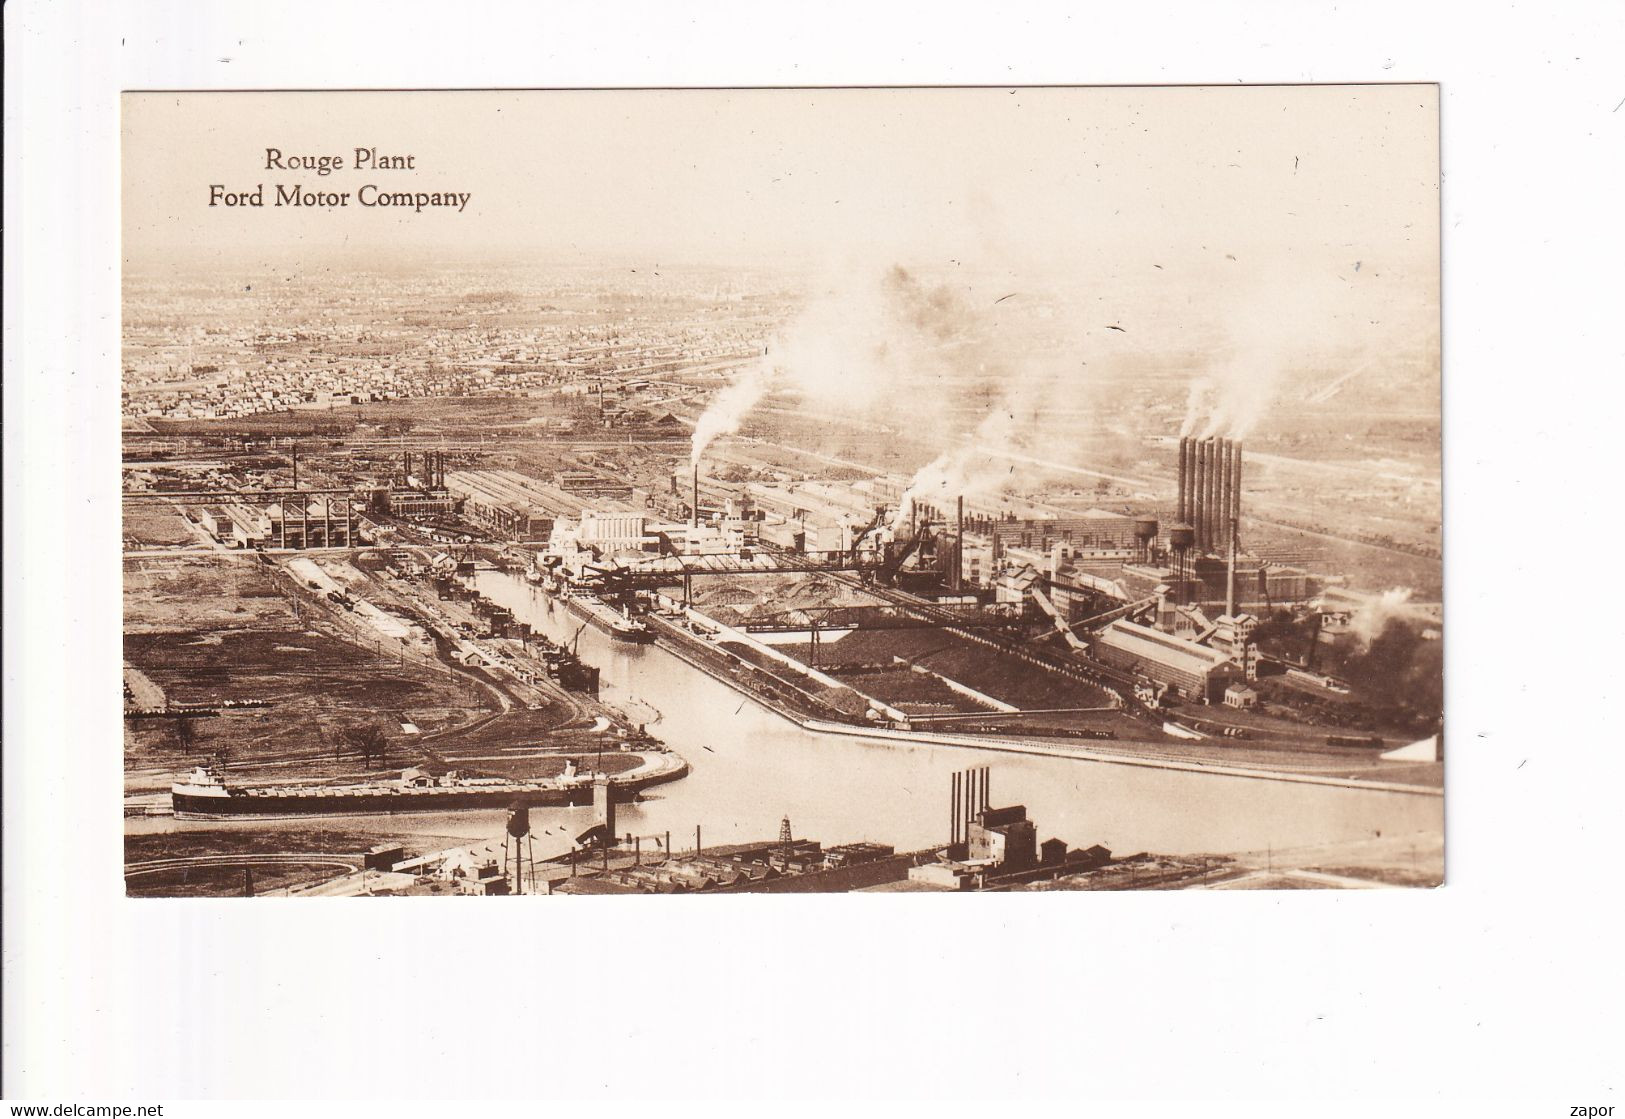 Rouge Plant - Ford Motor Company Is One Of The Largest Industrial Centers - Dearborn